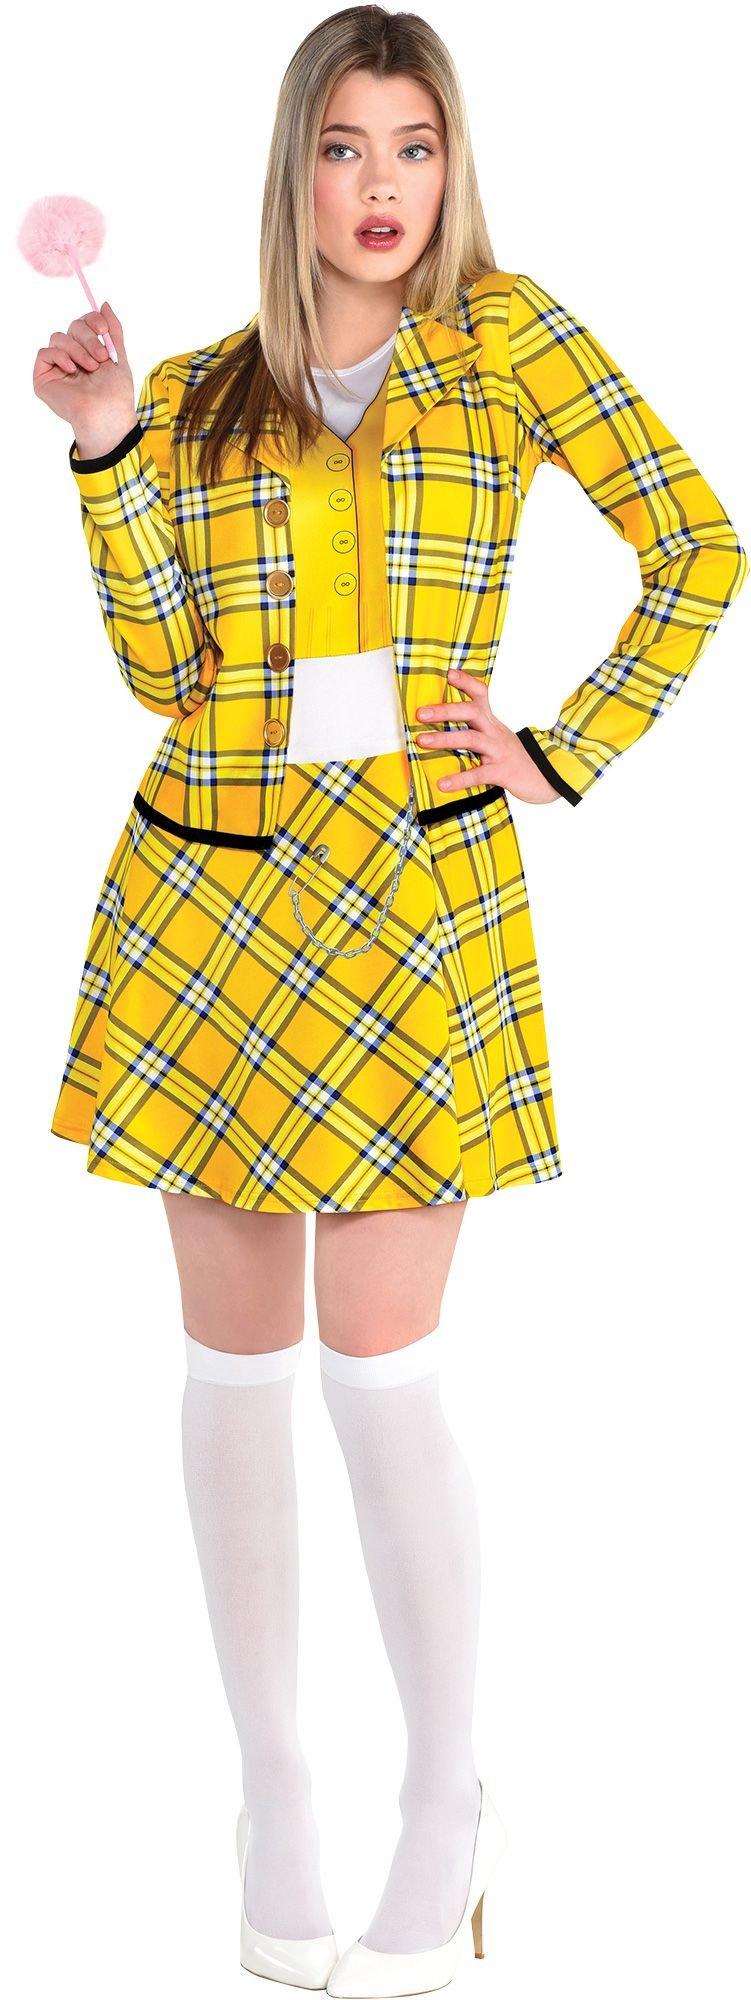 Adult Cher Costume Accessory Kit - Clueless | Party City